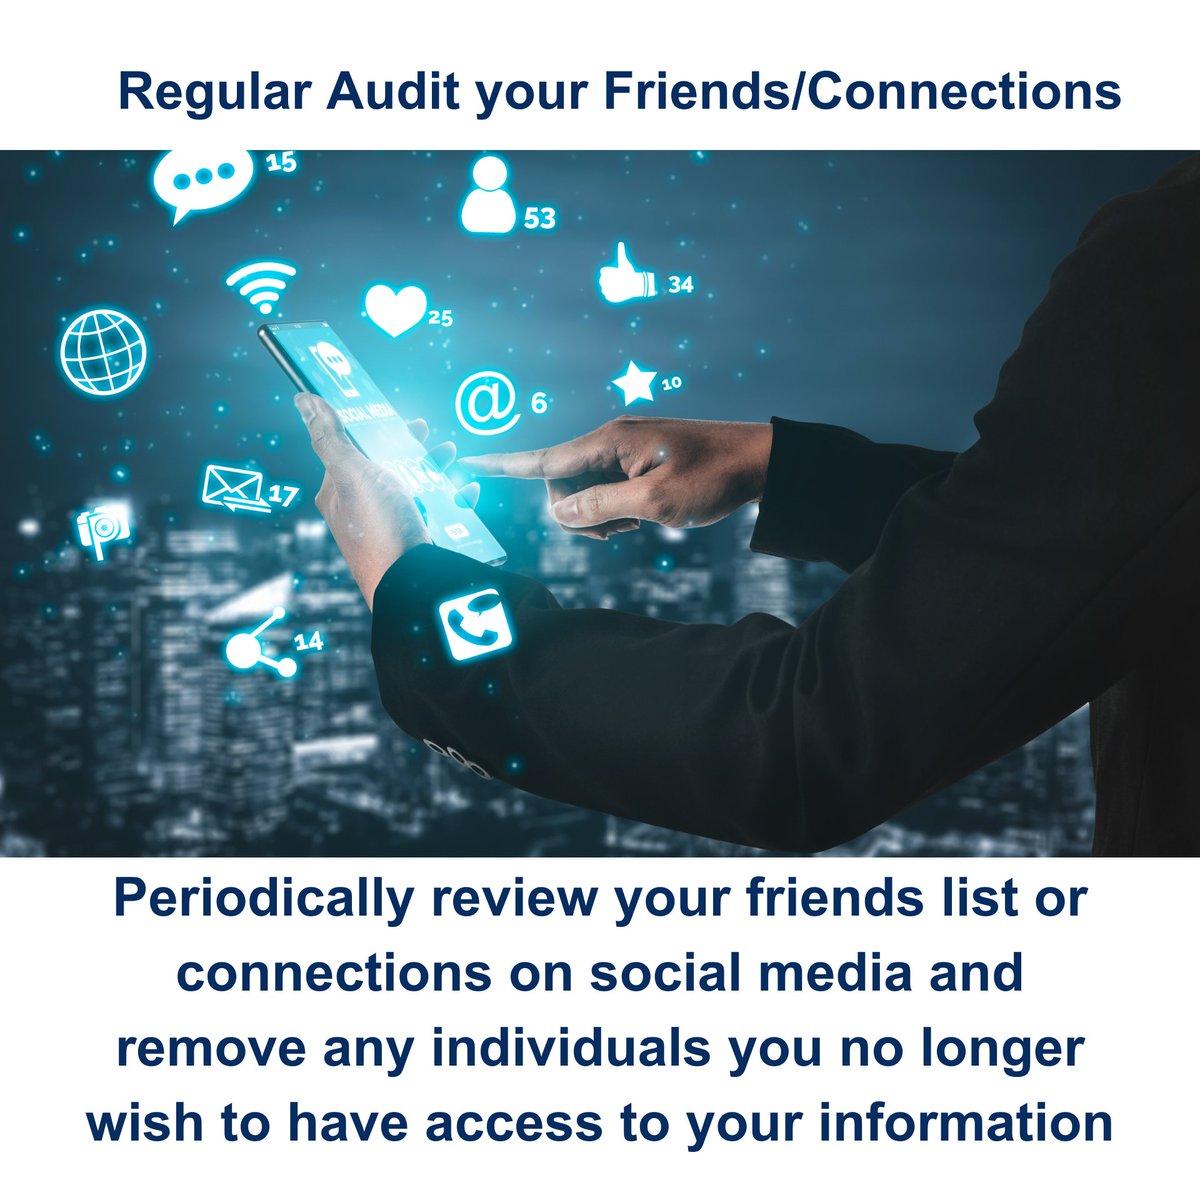 Keep Your Circle Tight!

It's essential to regularly review your friends list or connections on social media. Remove anyone you no longer want accessing your info, whether they're old acquaintances or accounts you don't recognize.

#PrivacyControl #OnlineSafety #TechTips